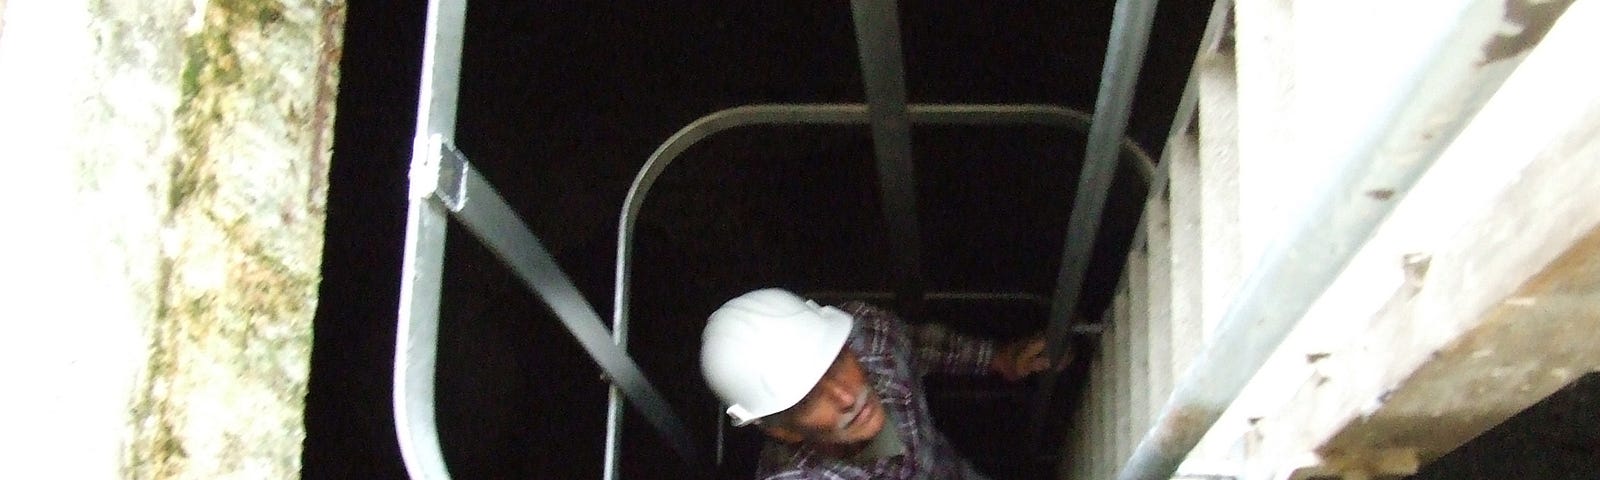 Man in white hard hat going down a safety ladder into Grime’s Graves